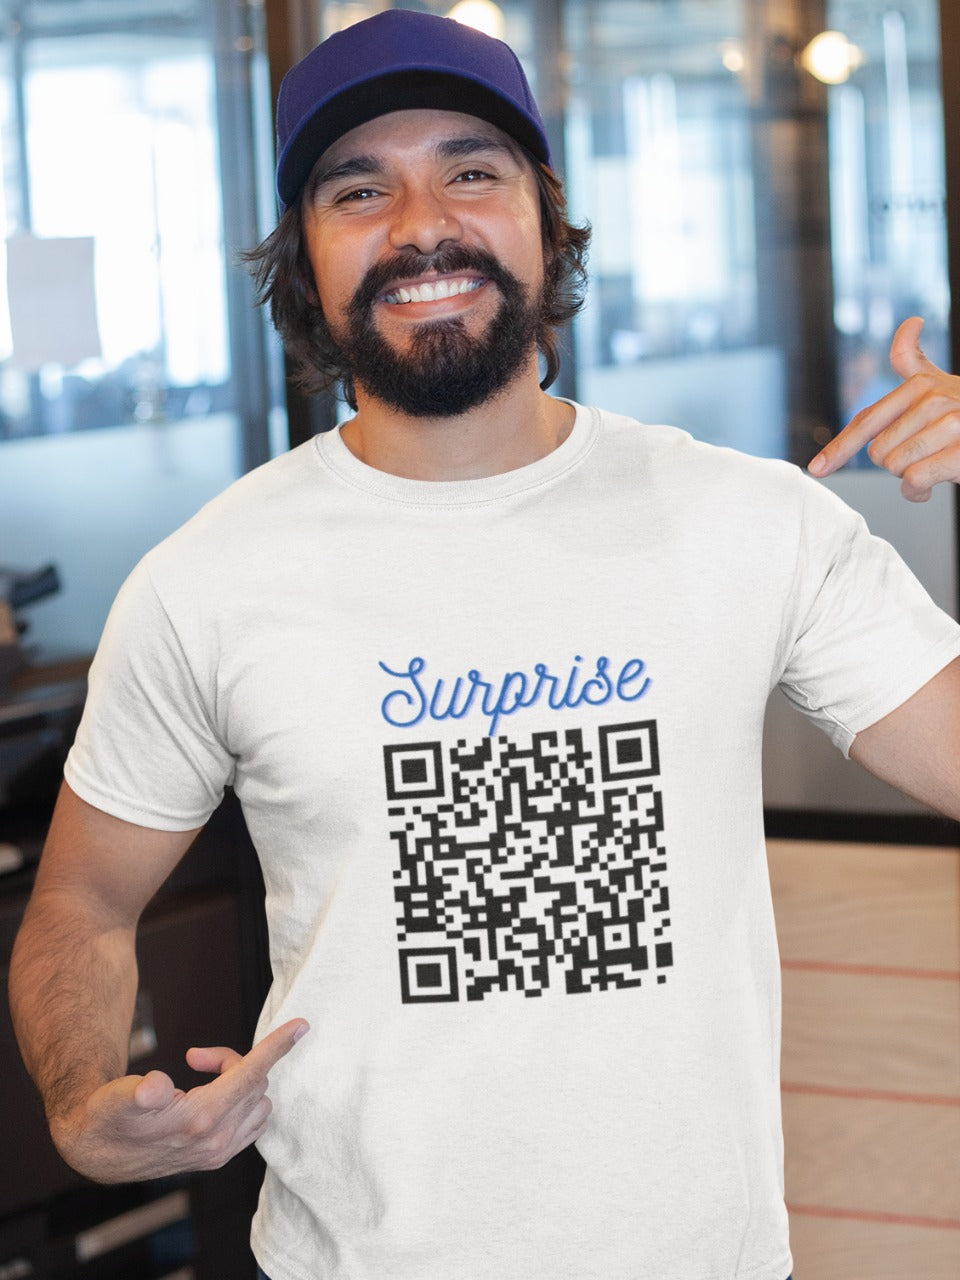 Man wearing a blue cap and a white tshirt with QR code with surprise written on it